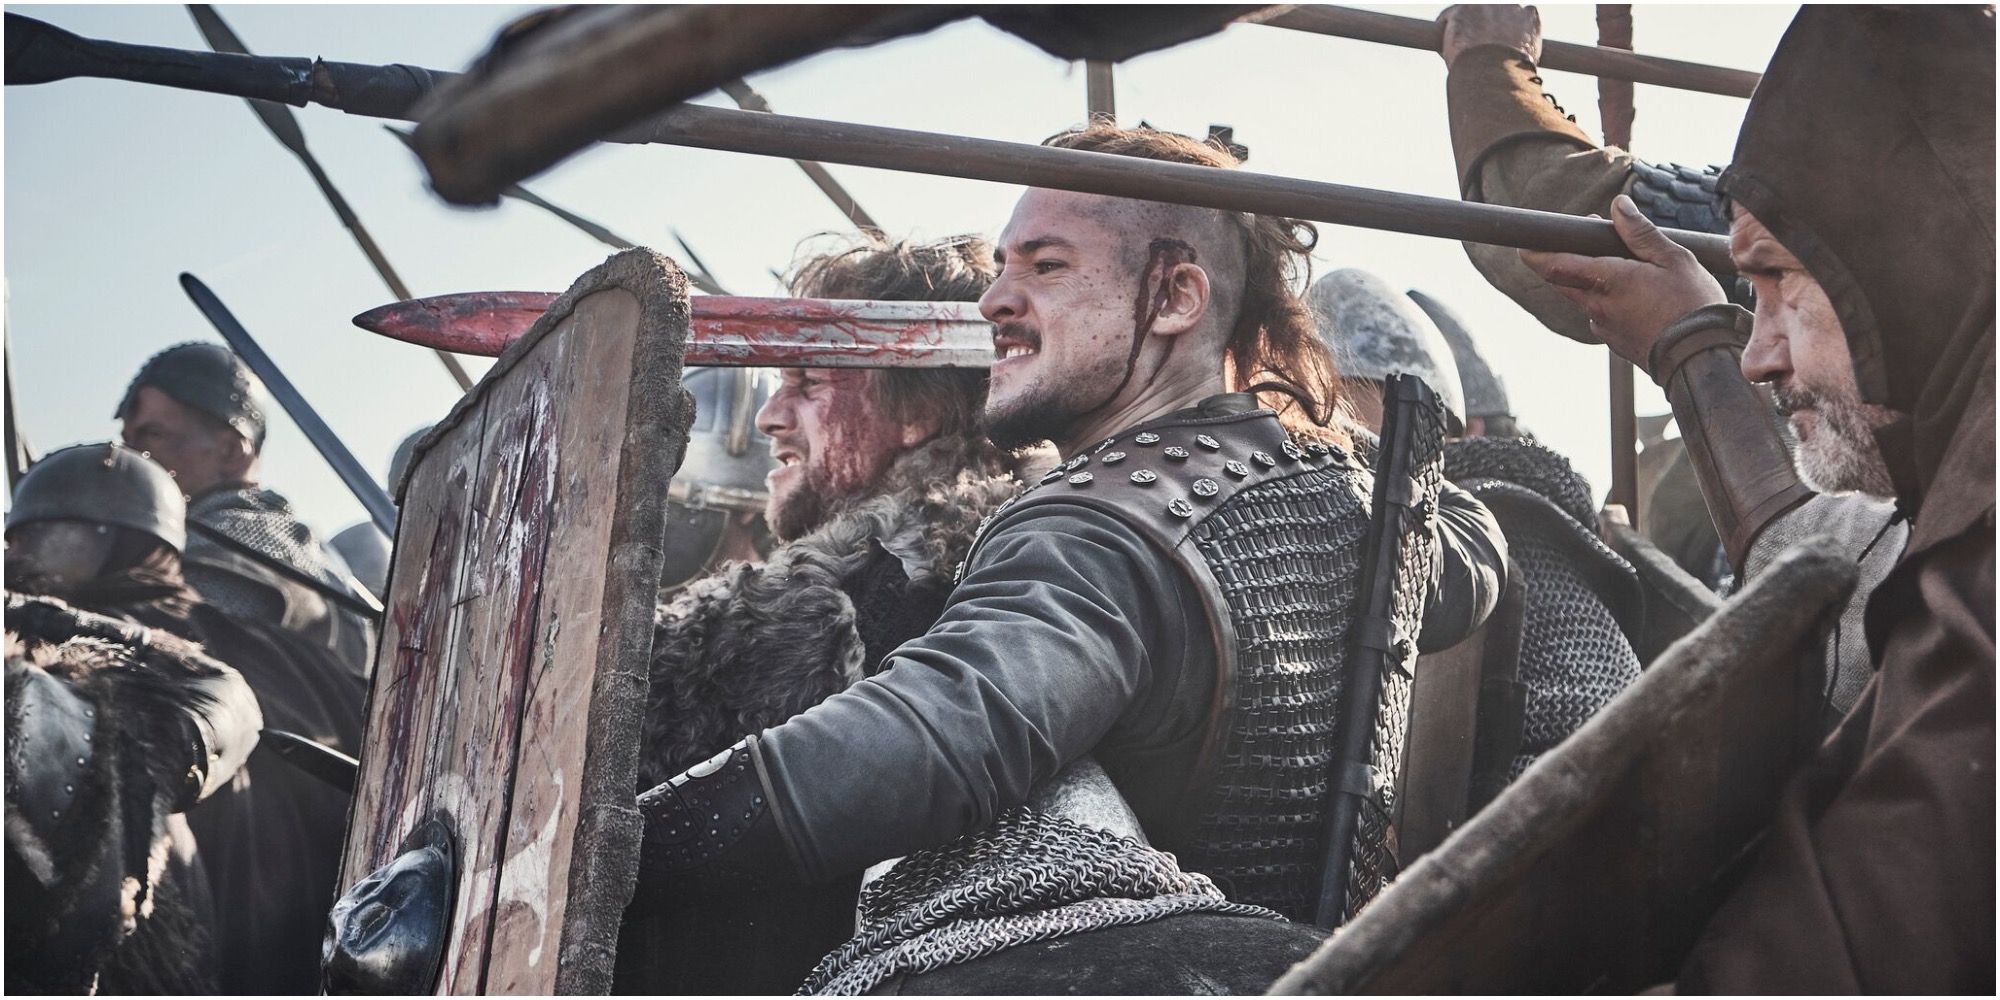 The Last Kingdom Picture of Uthred in Battle With Allies